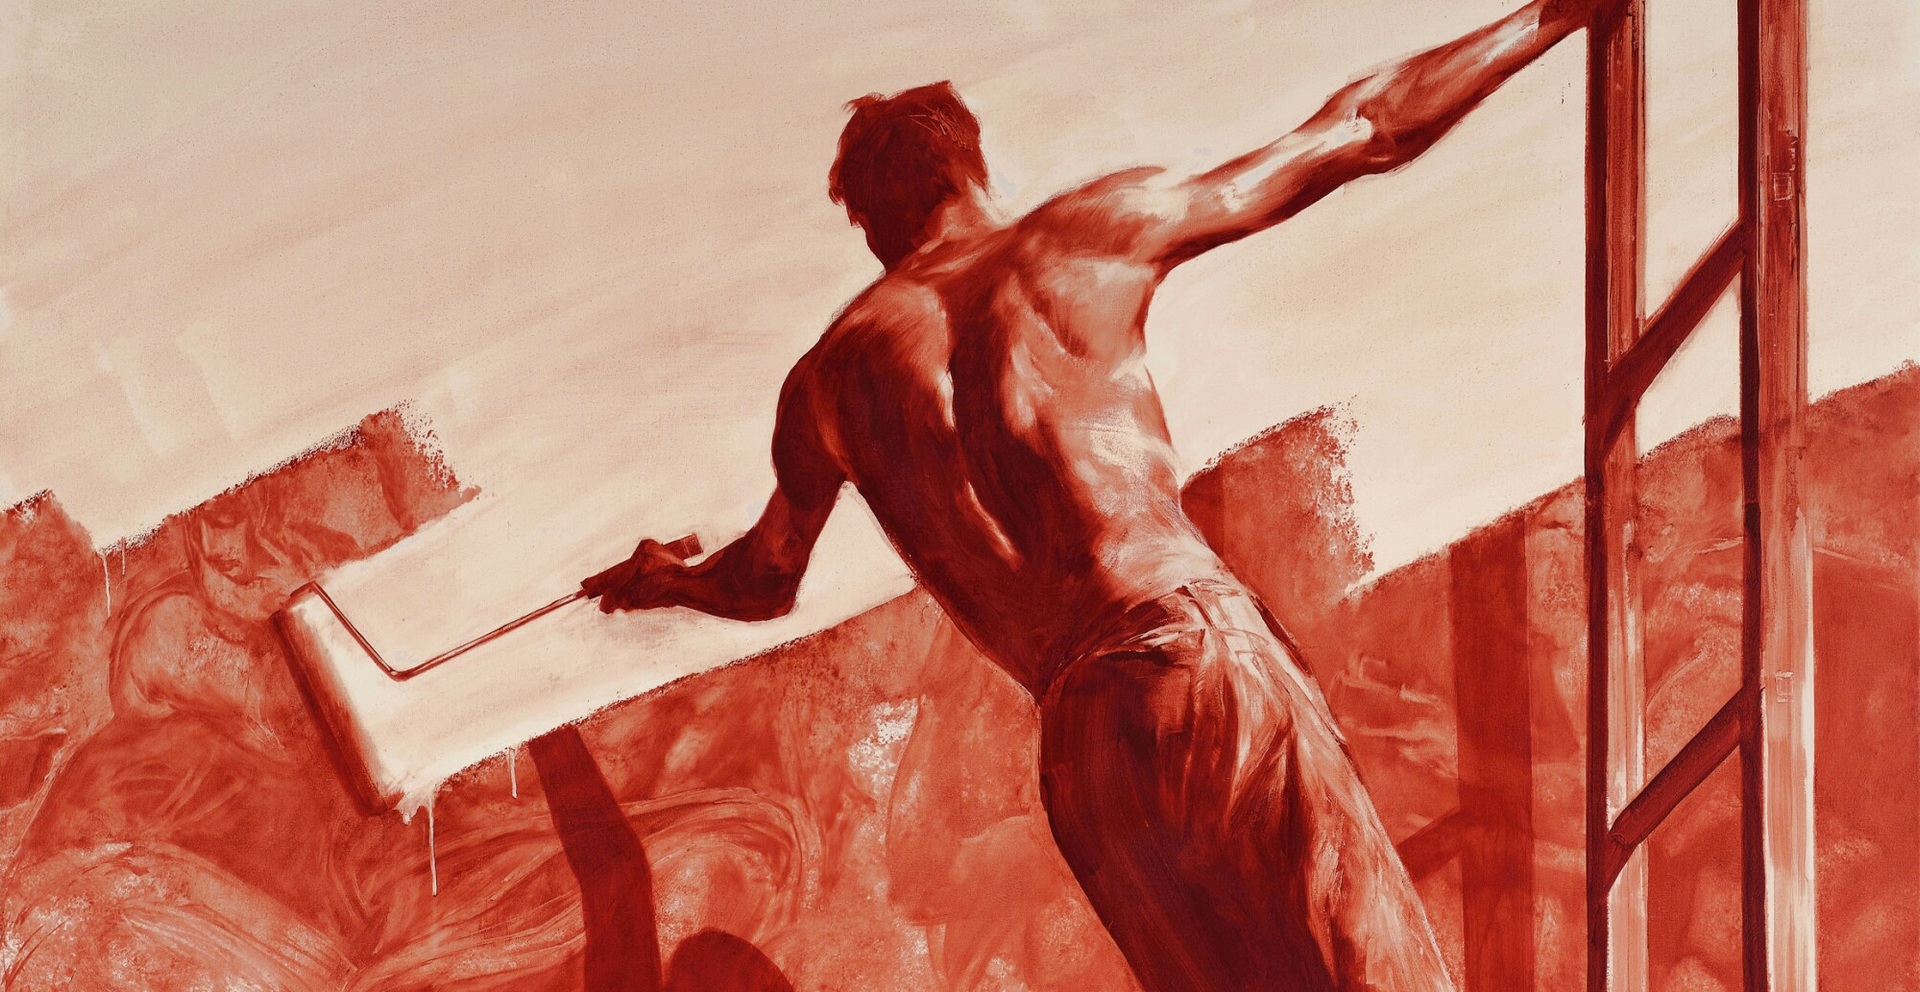 This painting by Mark Tansey shows a shirtless man hanging onto a ladder and straining to paint a wall behind him white. The work is done in tones of red and cream.